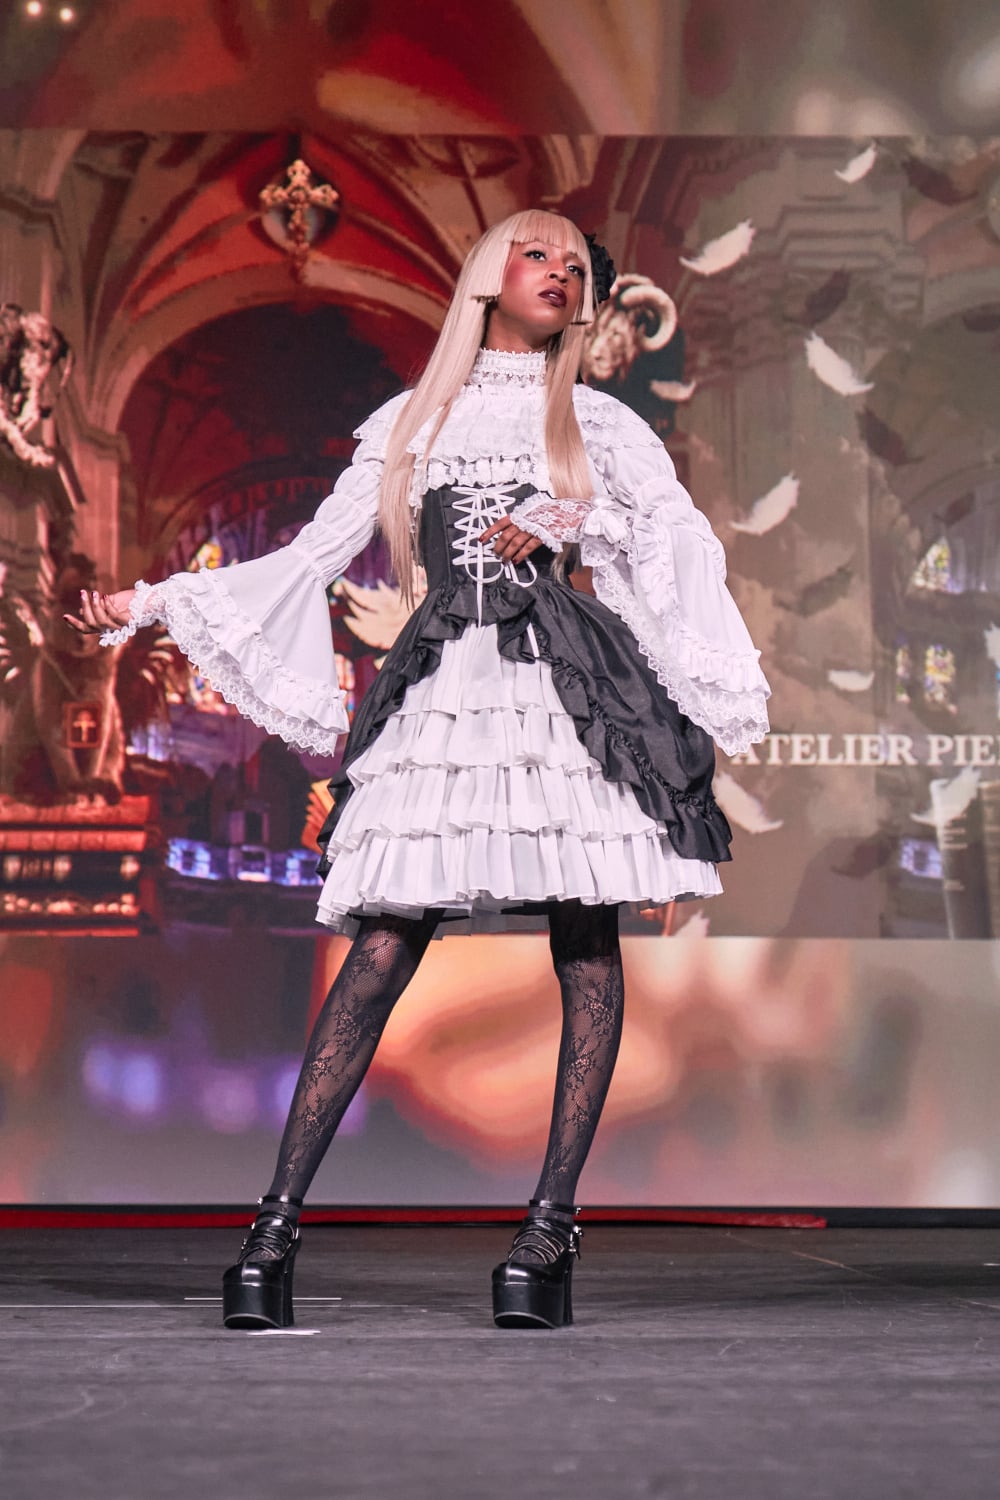 Atelier Pierrot gothic lolita model wearing black and white bustle corset jumperskirt with white princess sleeve blouse - full body standing pose 2.